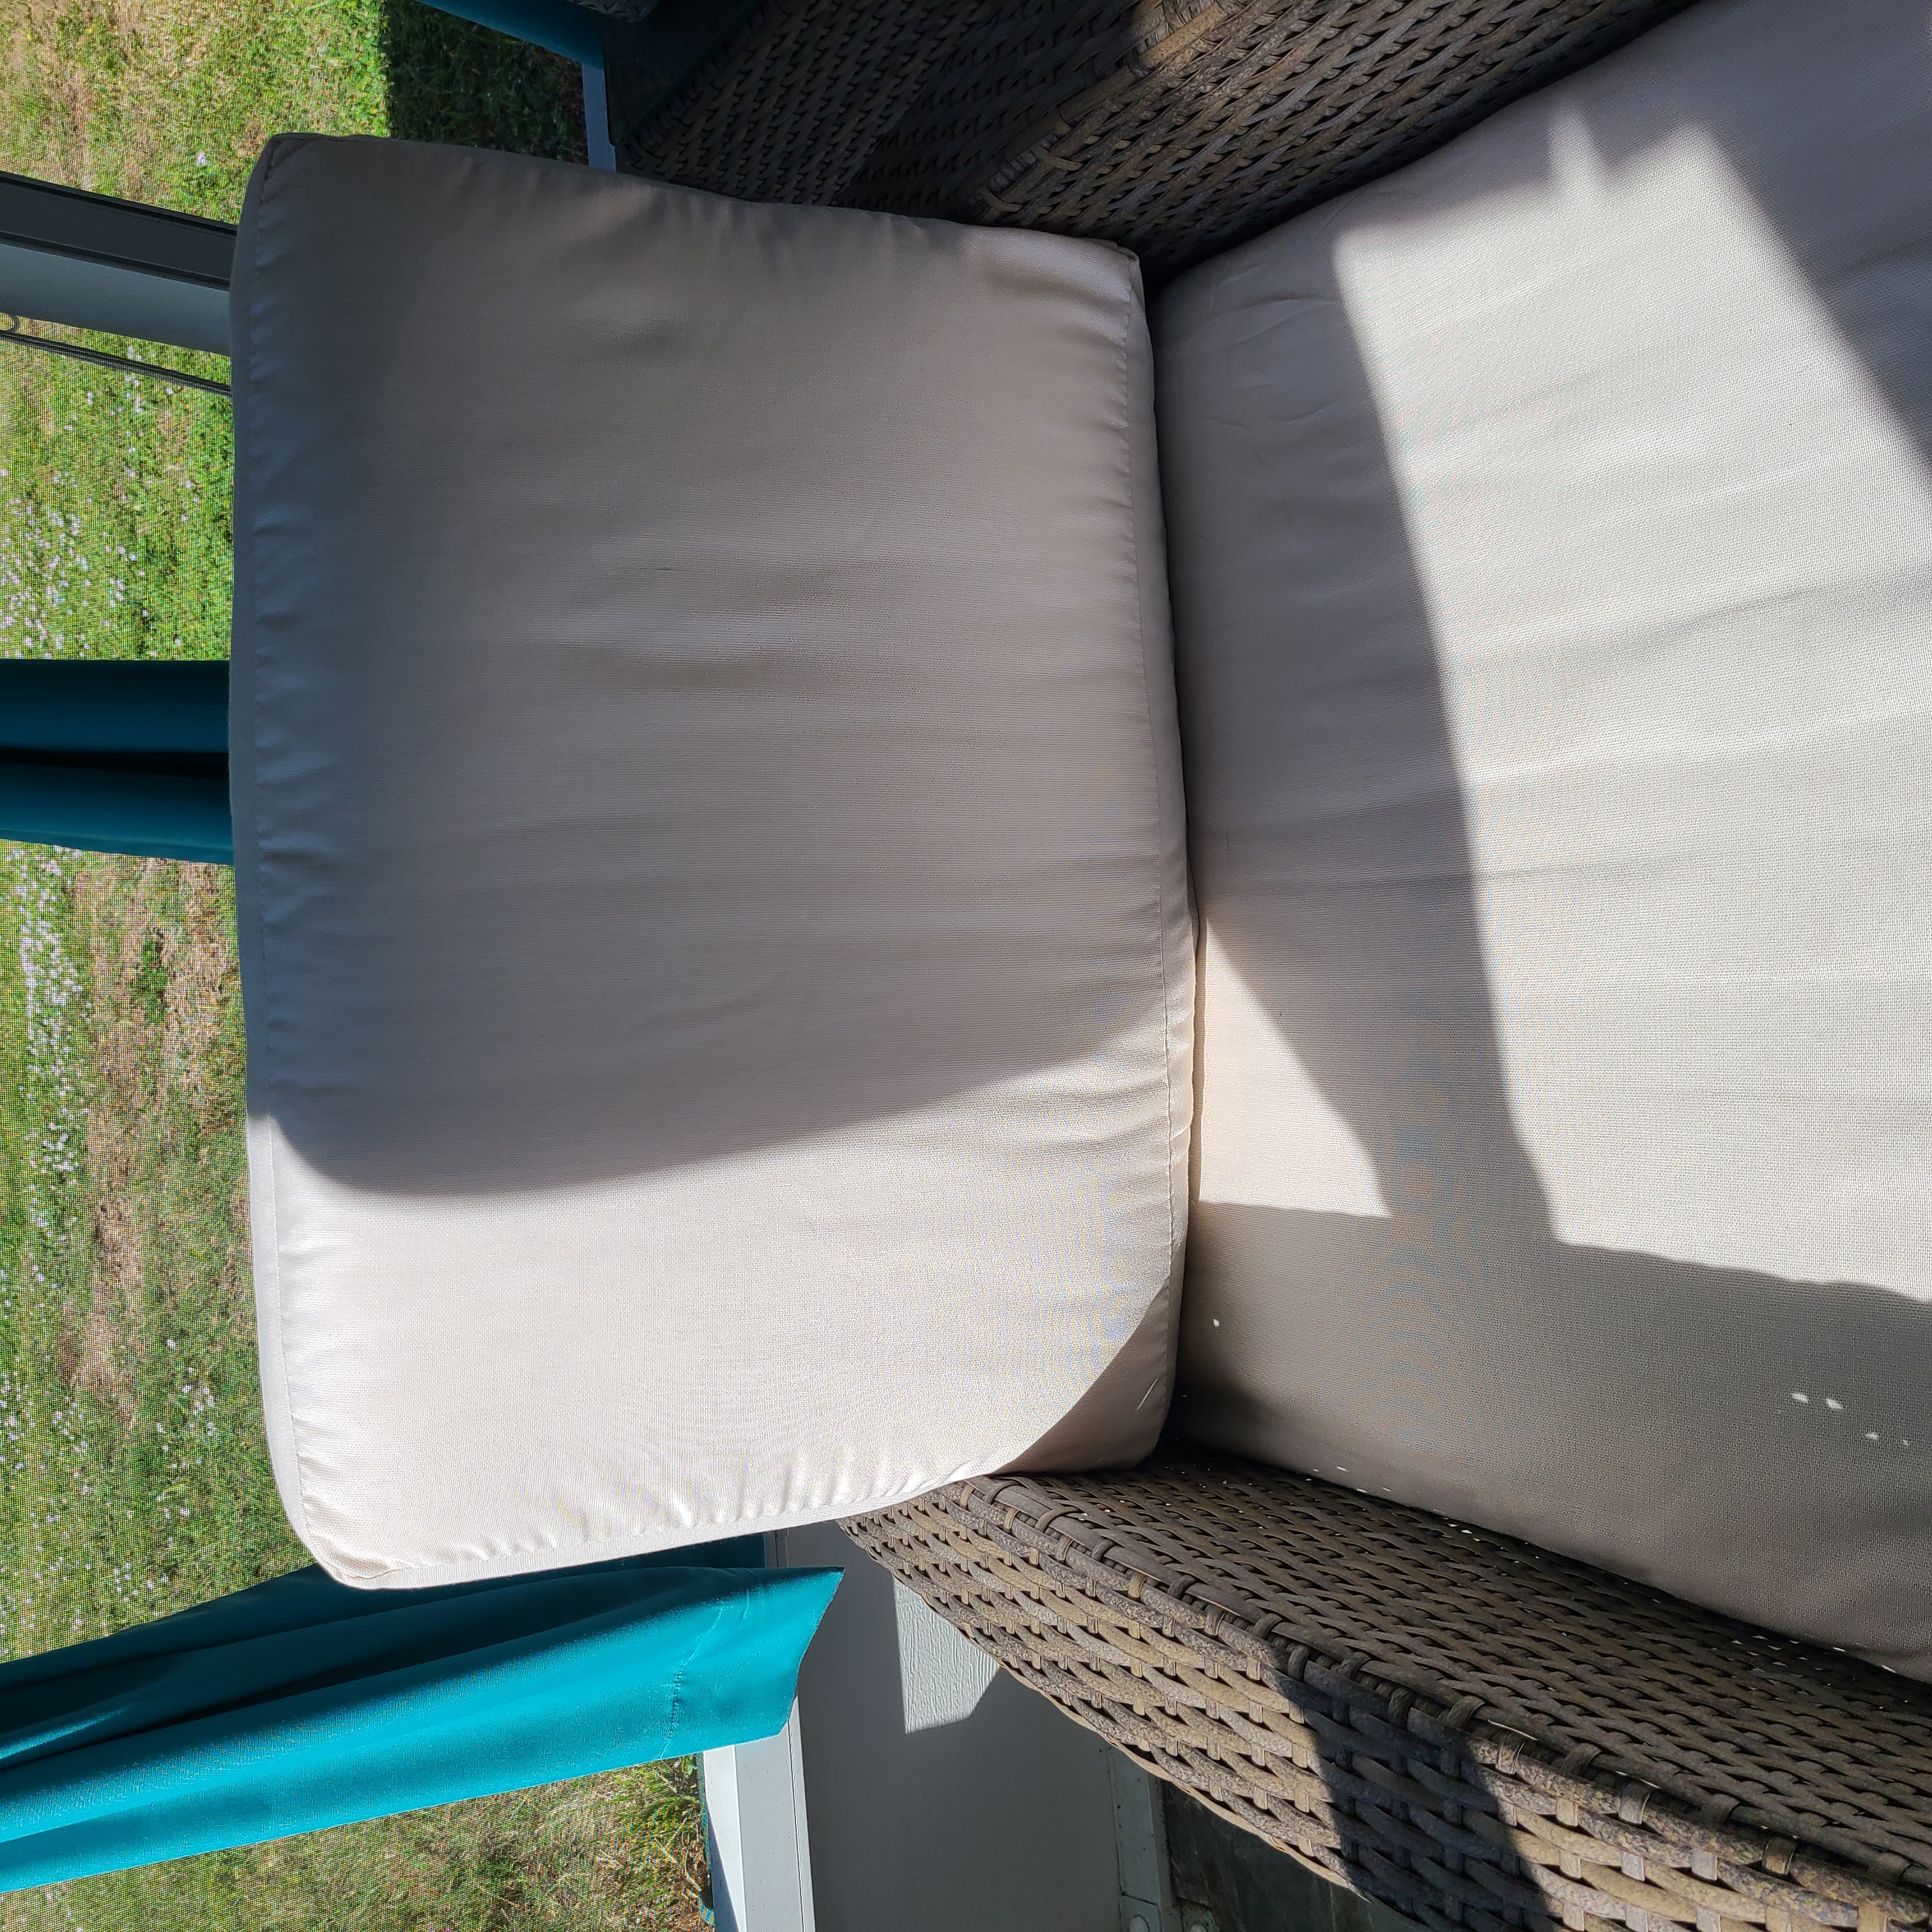 SOFA CUSHIONS - BEDS - OUTDOOR HQ SEATING FOAM CUT TO SIZE ANY